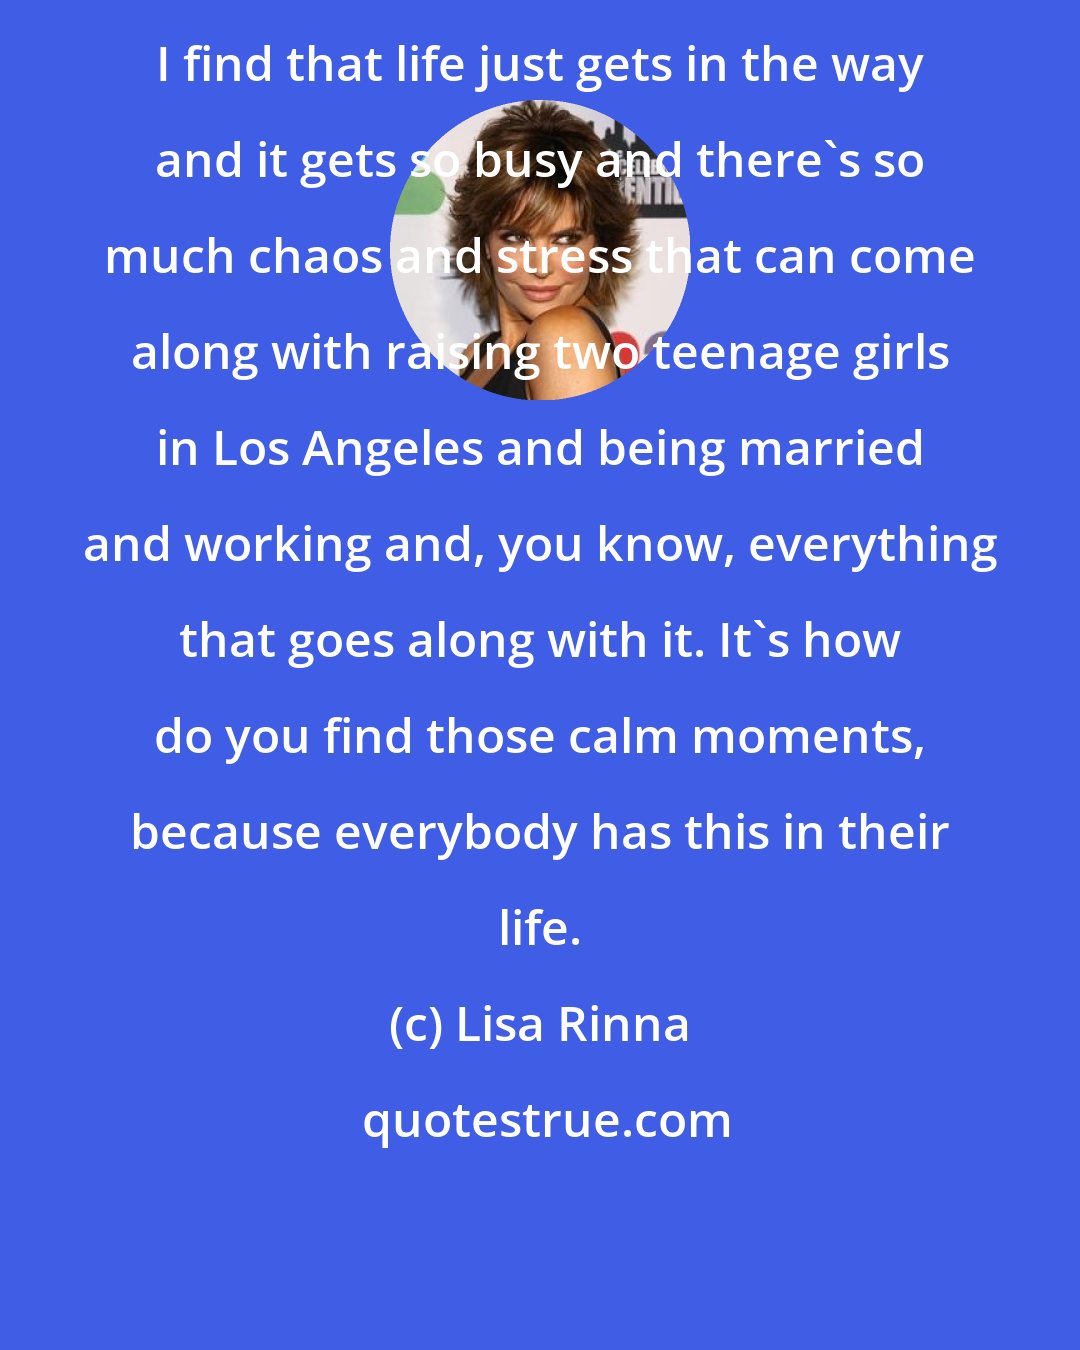 Lisa Rinna: I find that life just gets in the way and it gets so busy and there's so much chaos and stress that can come along with raising two teenage girls in Los Angeles and being married and working and, you know, everything that goes along with it. It's how do you find those calm moments, because everybody has this in their life.